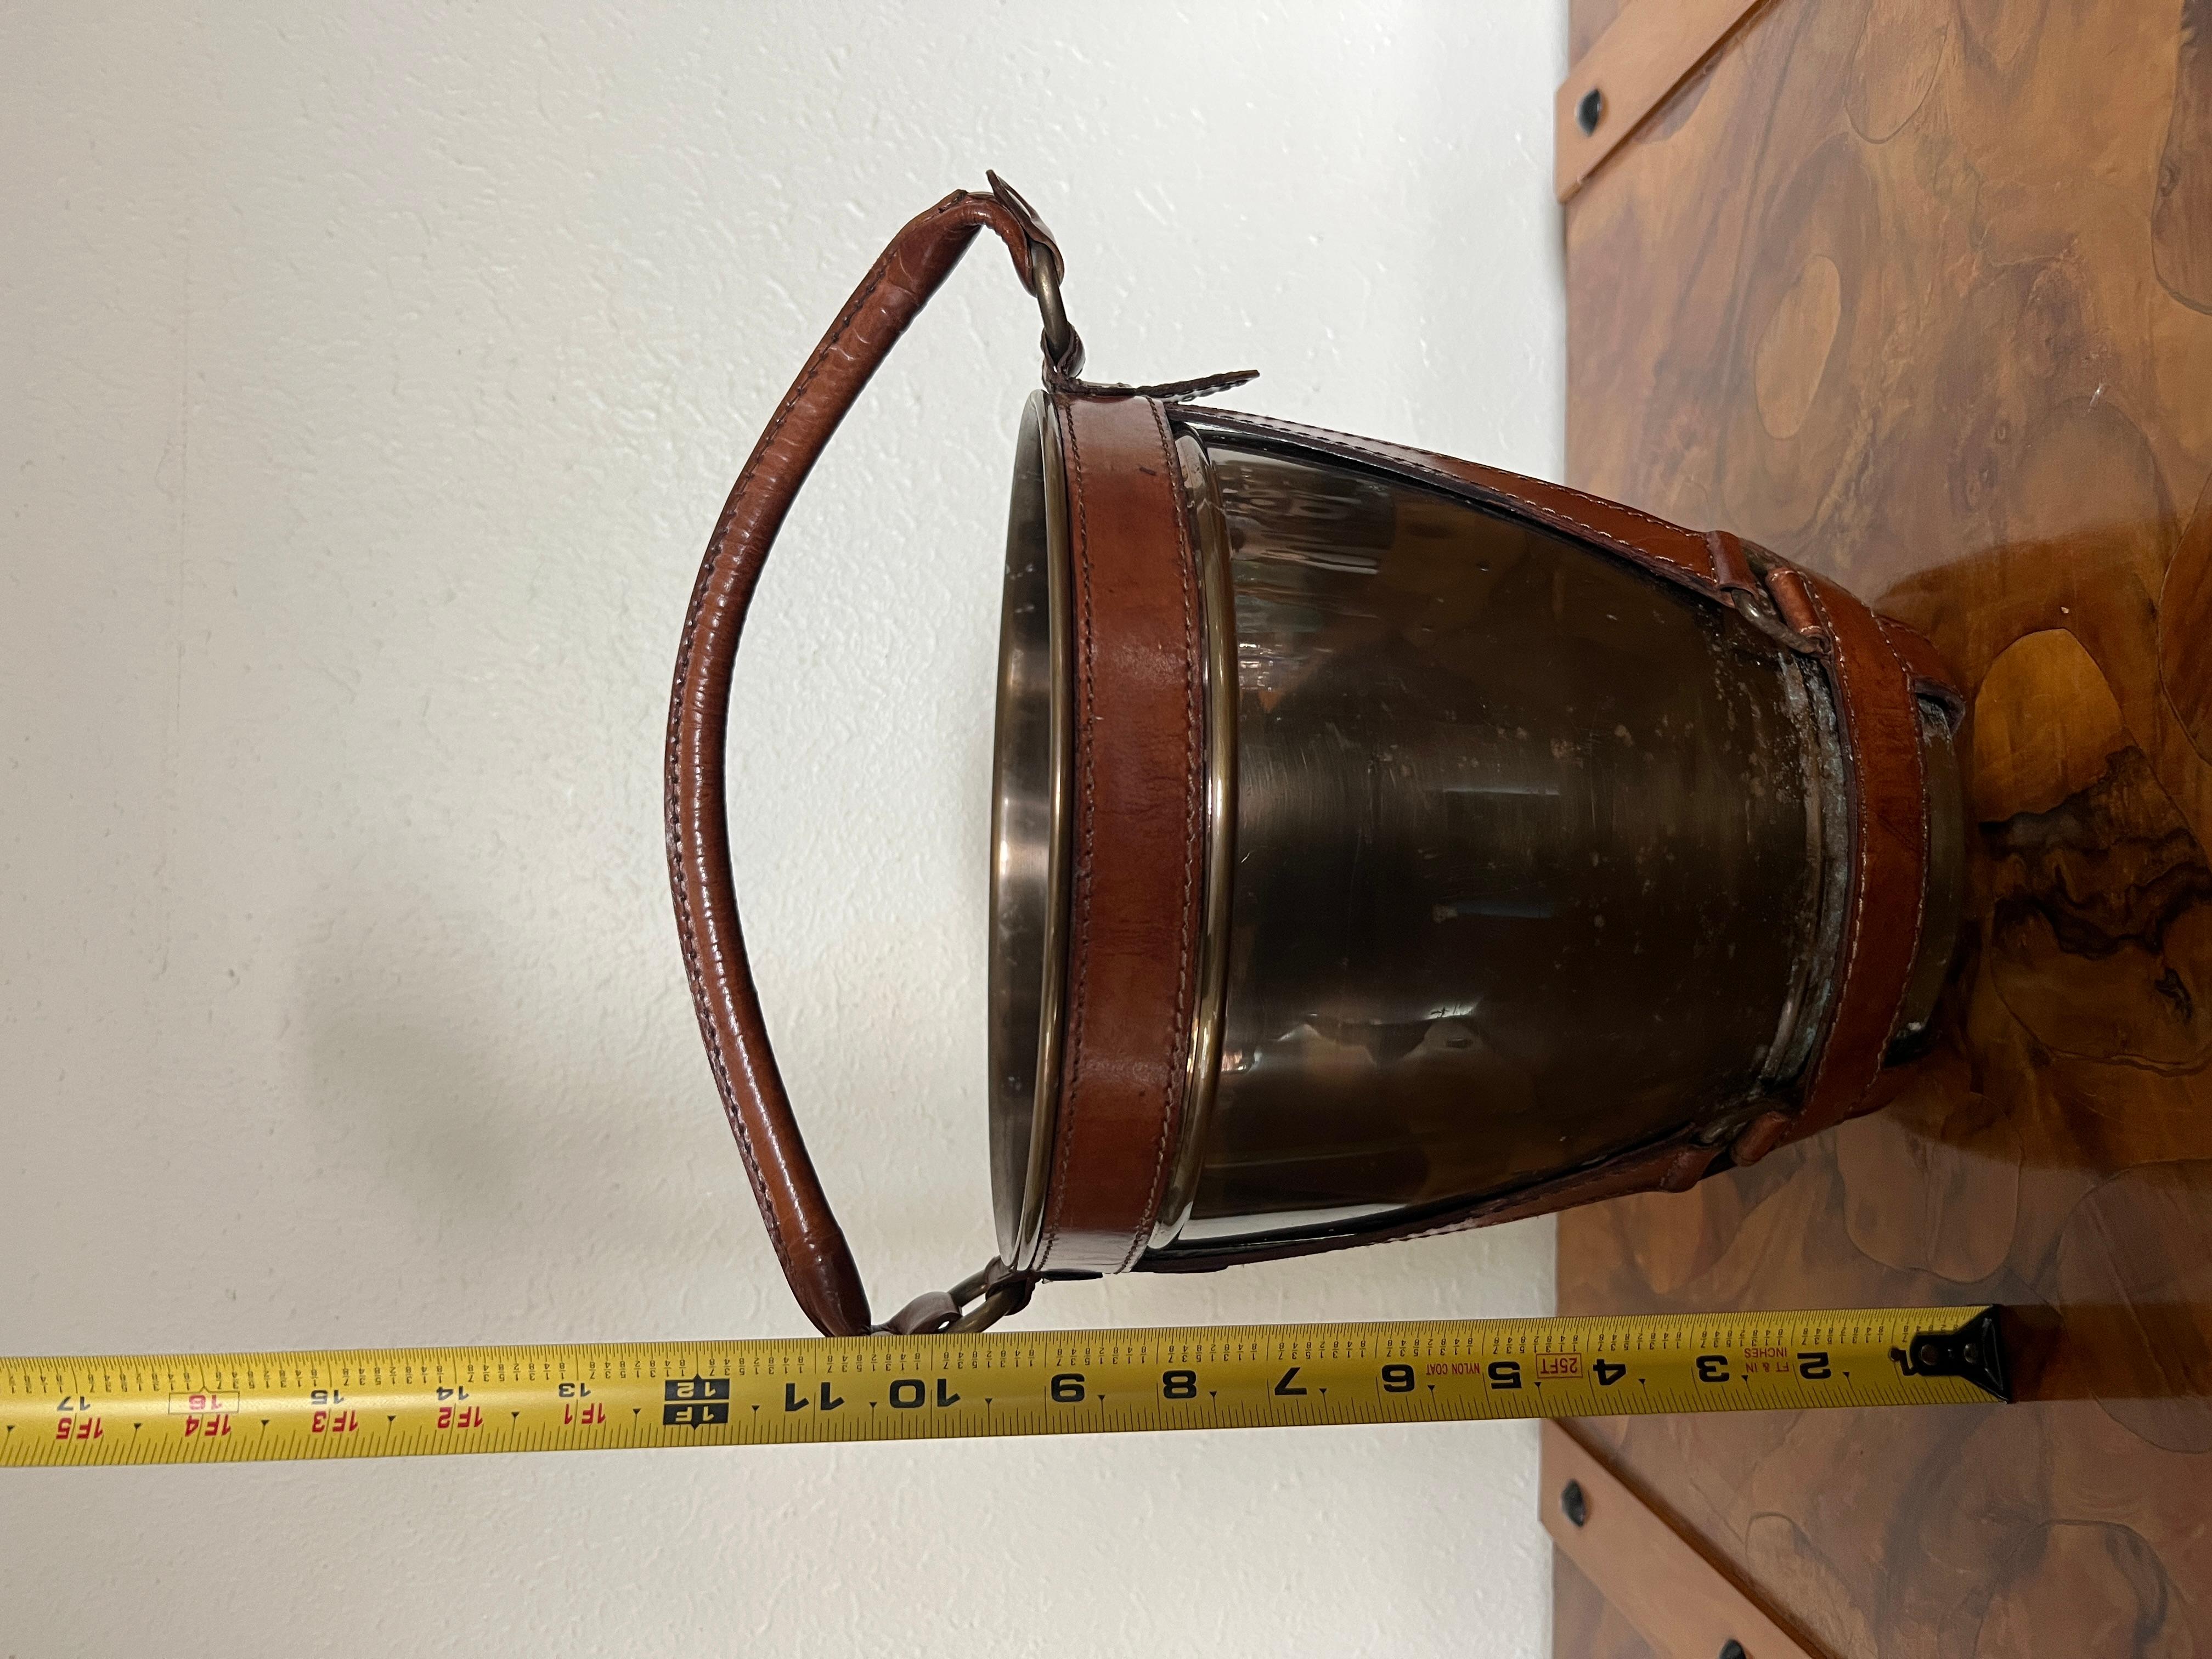 Leather handle midcentury style champagne ice bucket.

Handsome midcentury style modern ice bucket decorated with leather stripes and leather handle. An eye catching piece.